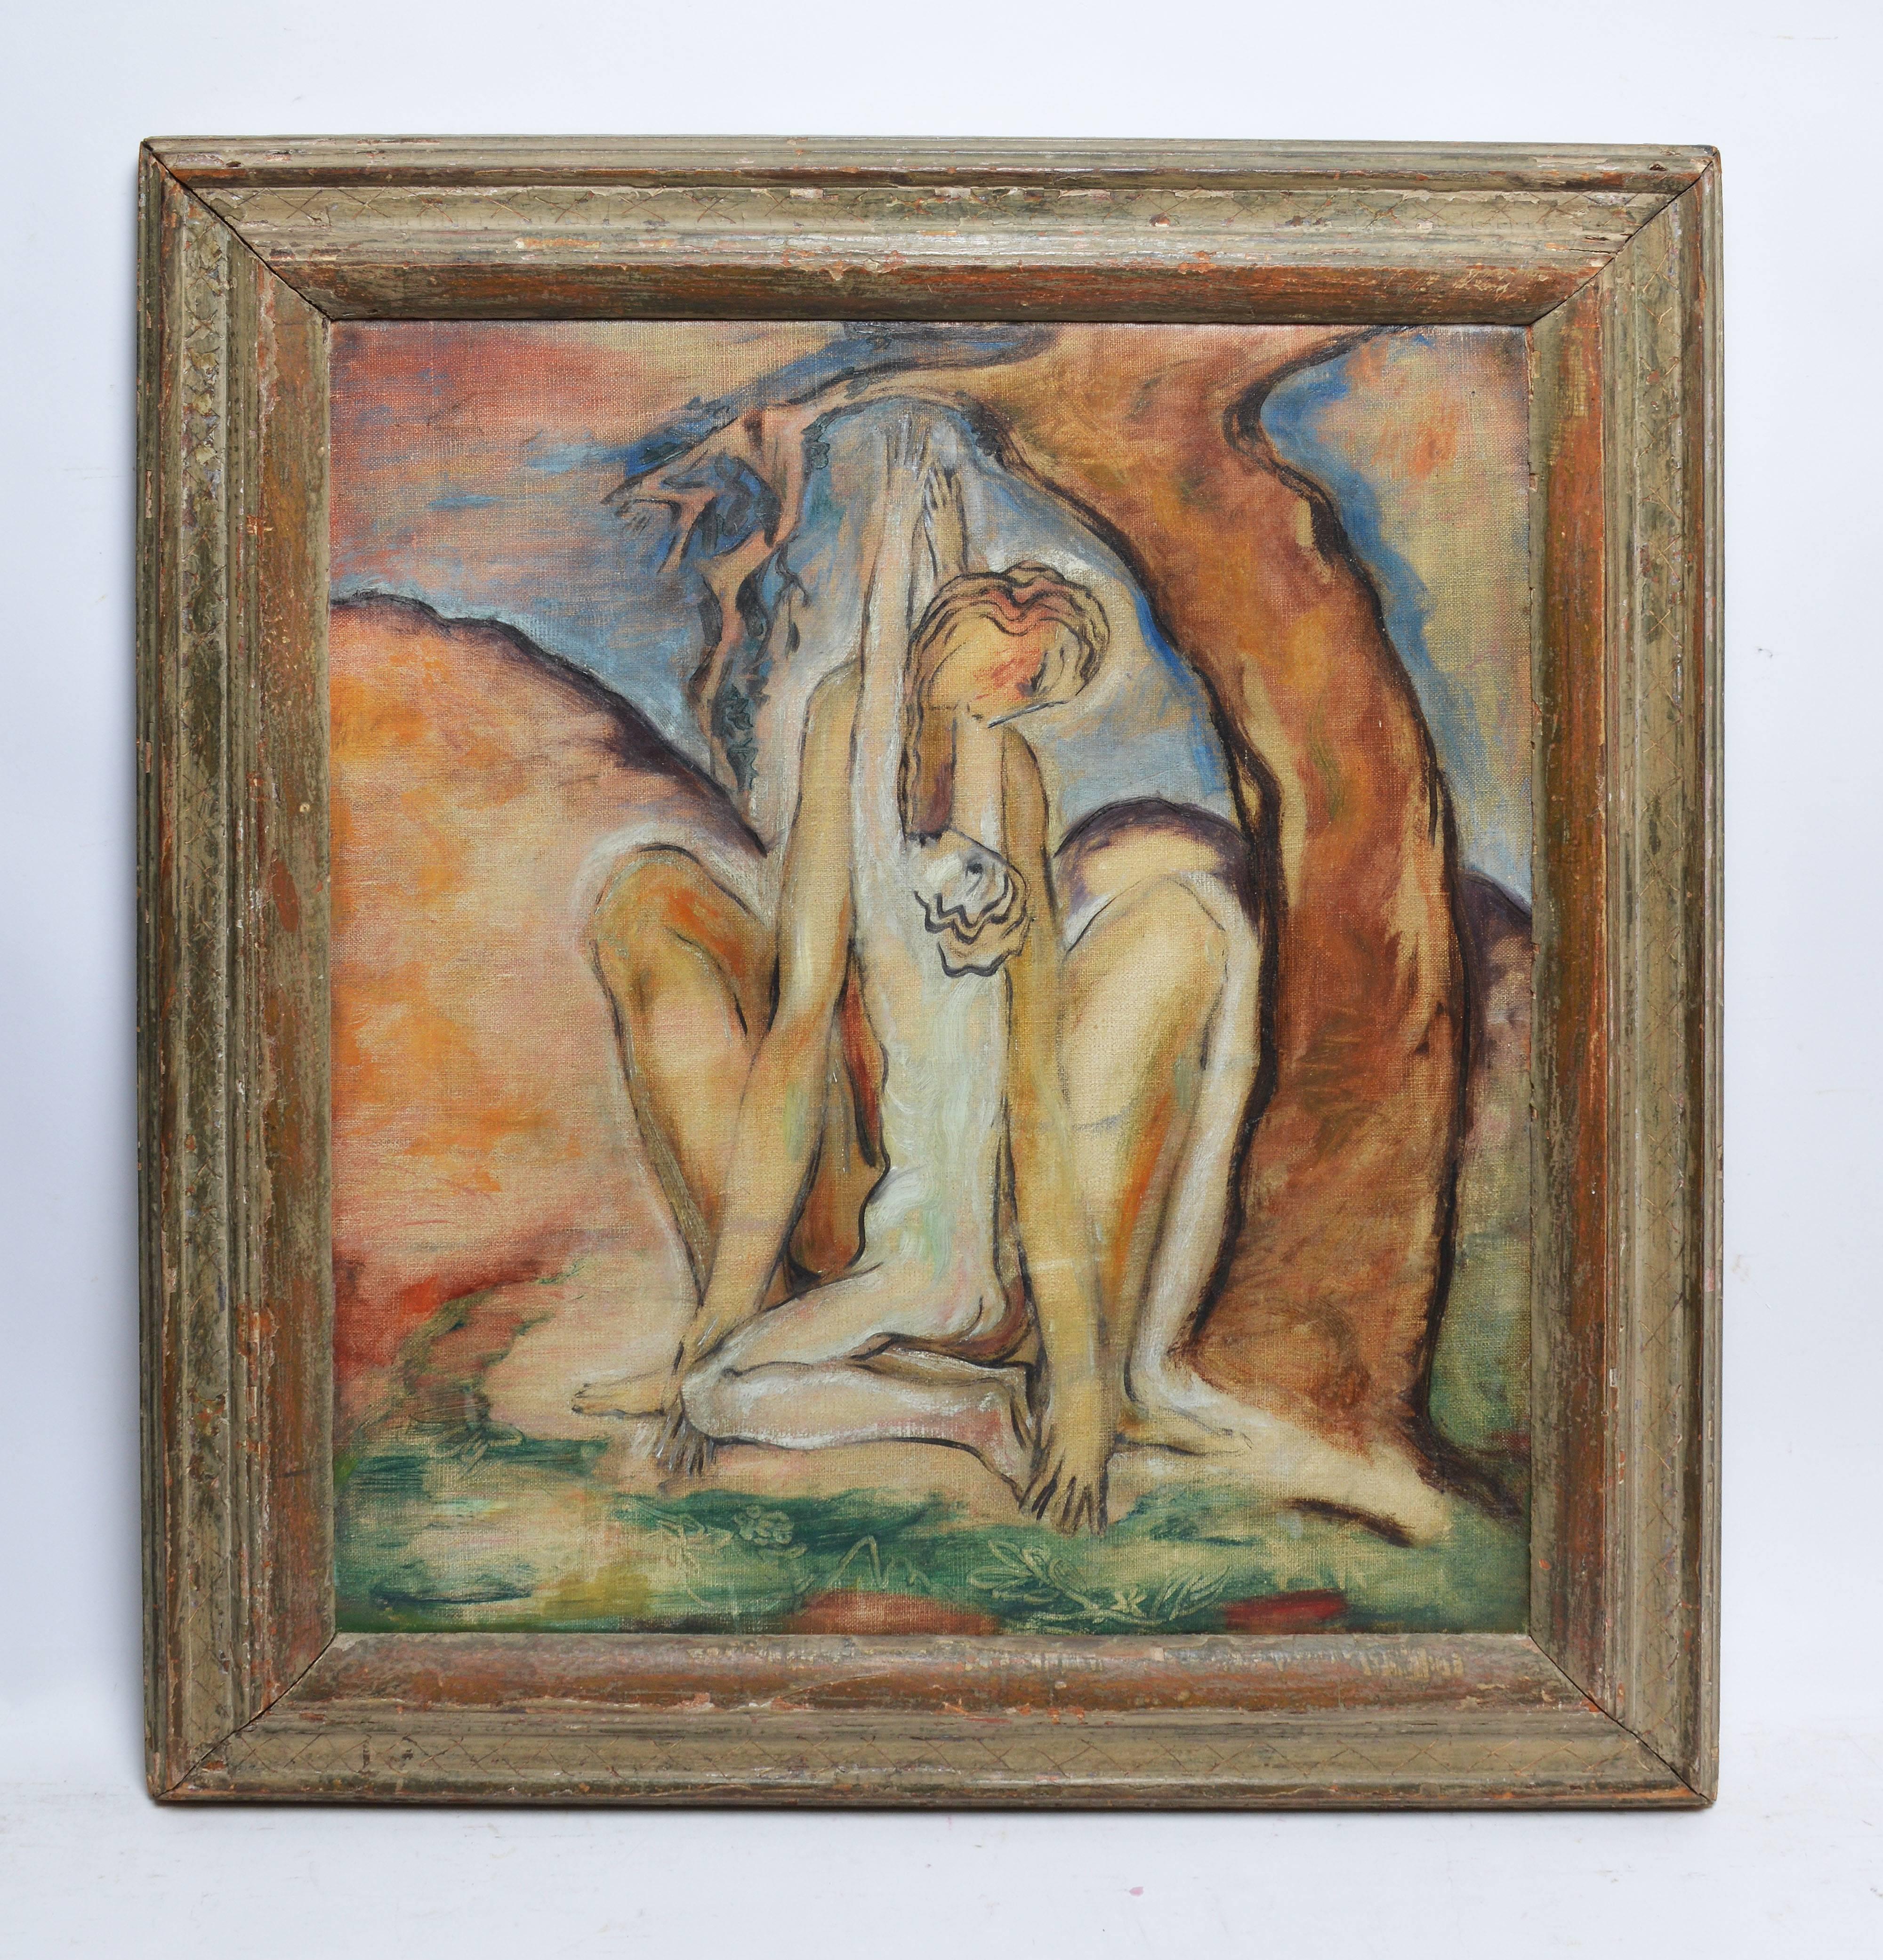 Unknown Figurative Painting - "The Embrace", American School Modernist Abstract Nude Composition